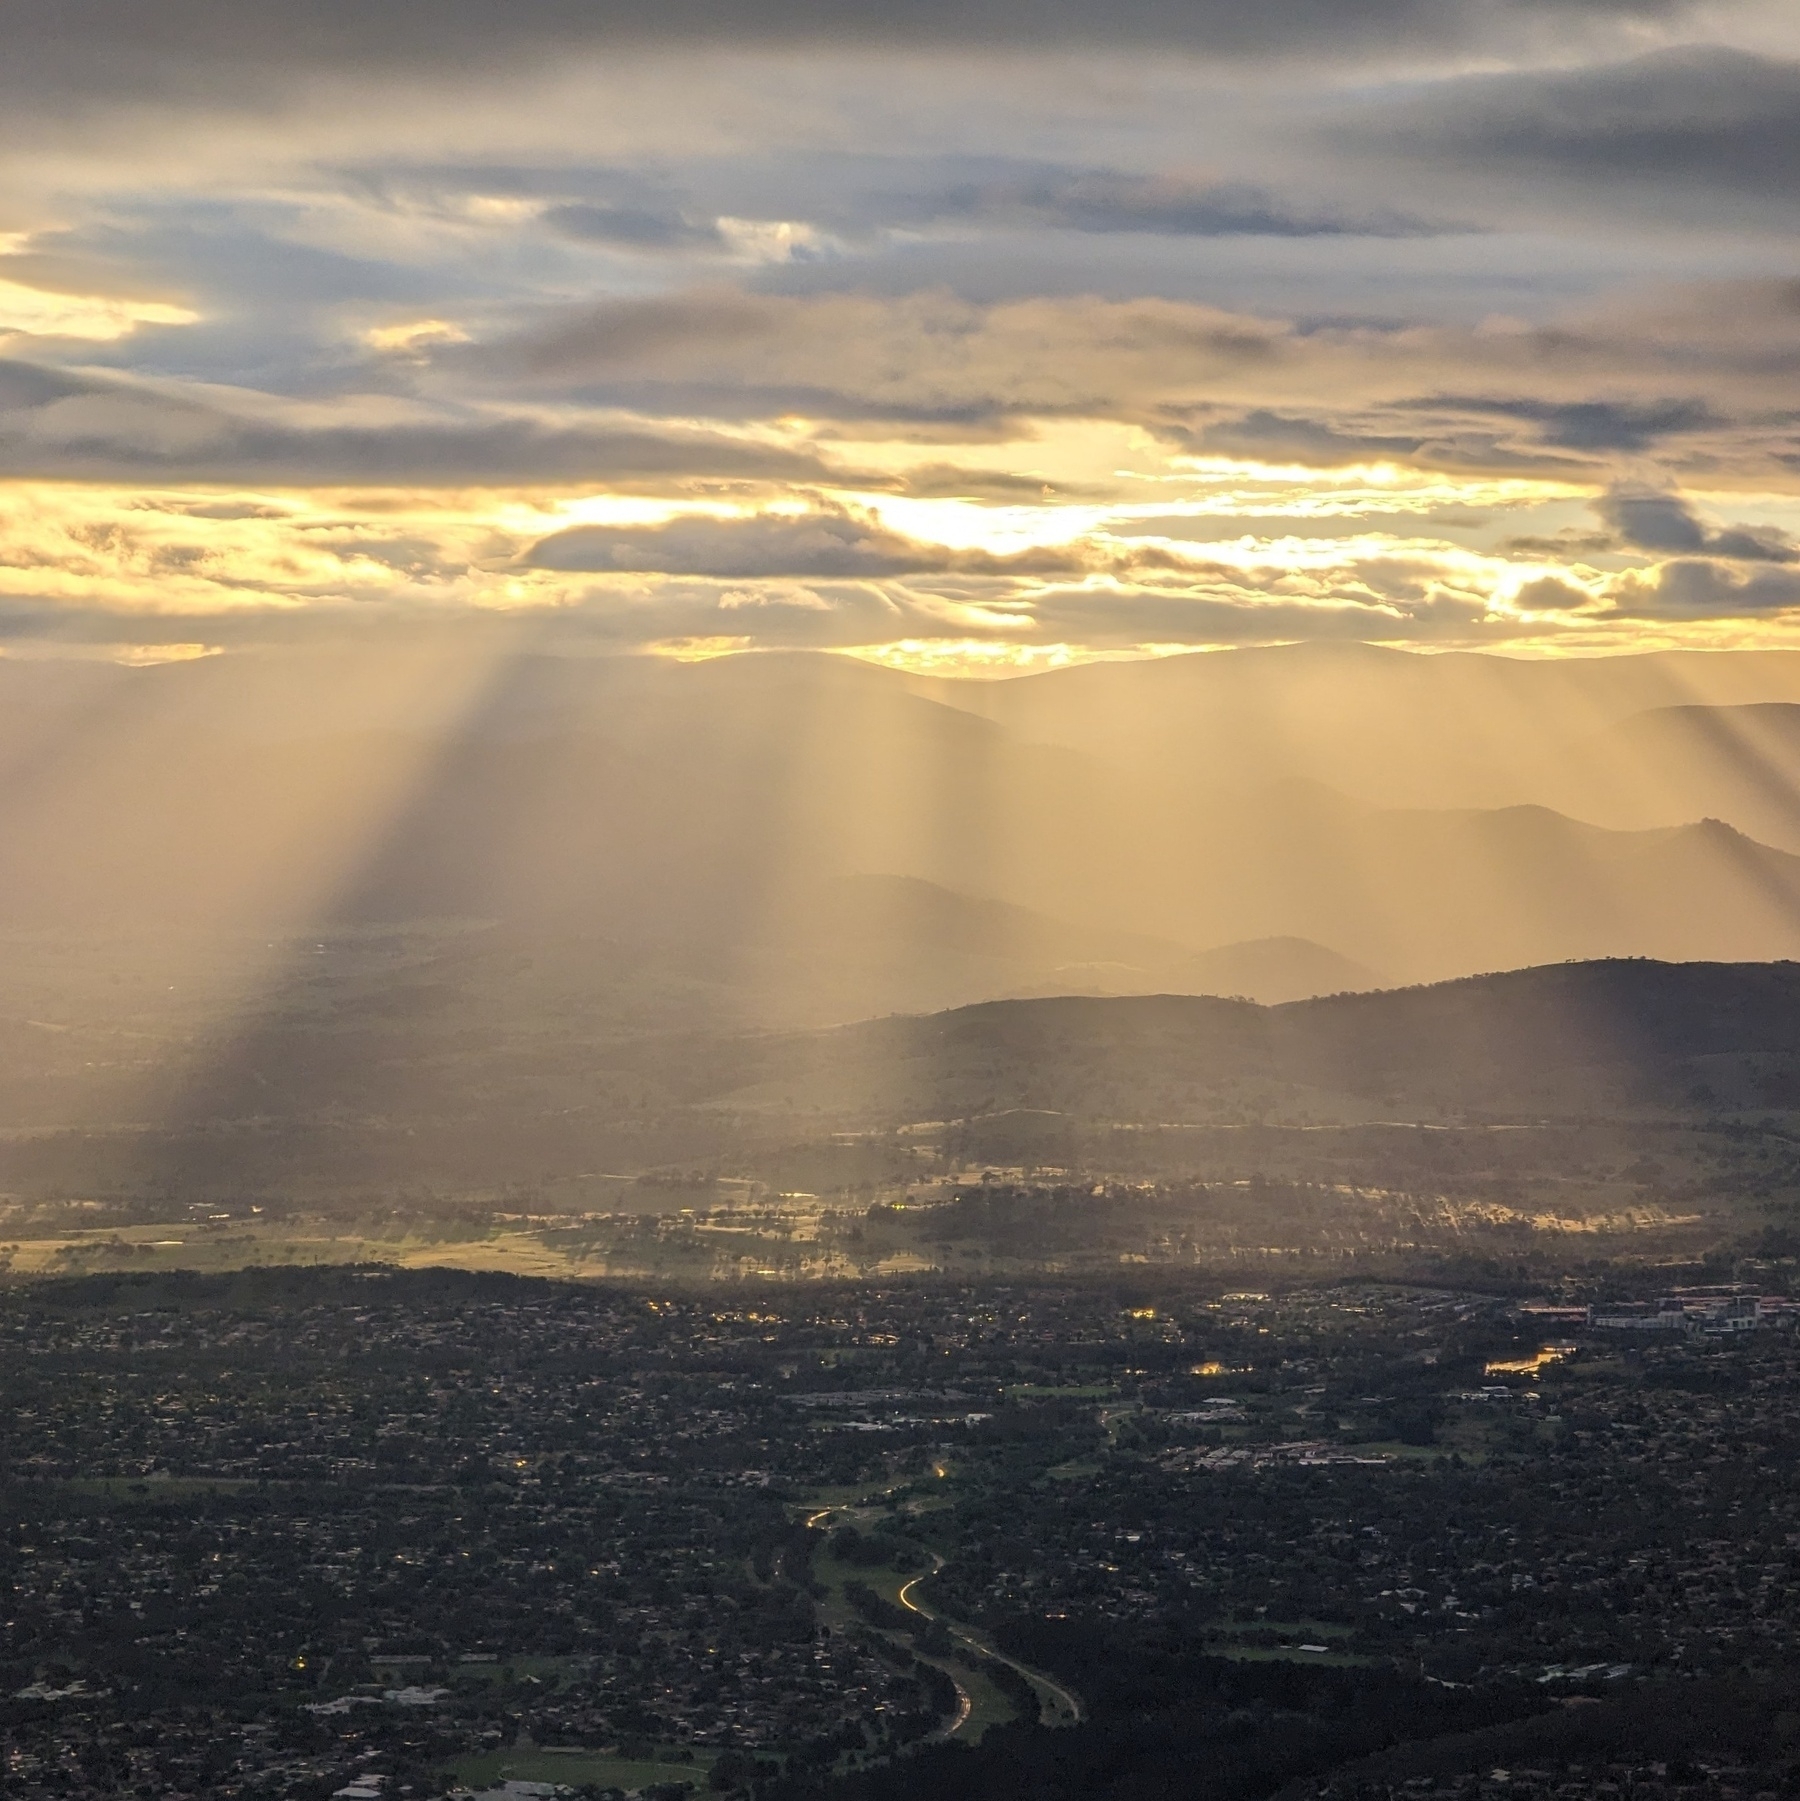 Aerial photo of a cloudy sunset over an urban area near the camera and hills in the distance, with sunlight streaming through the clouds and lighting the foothills.